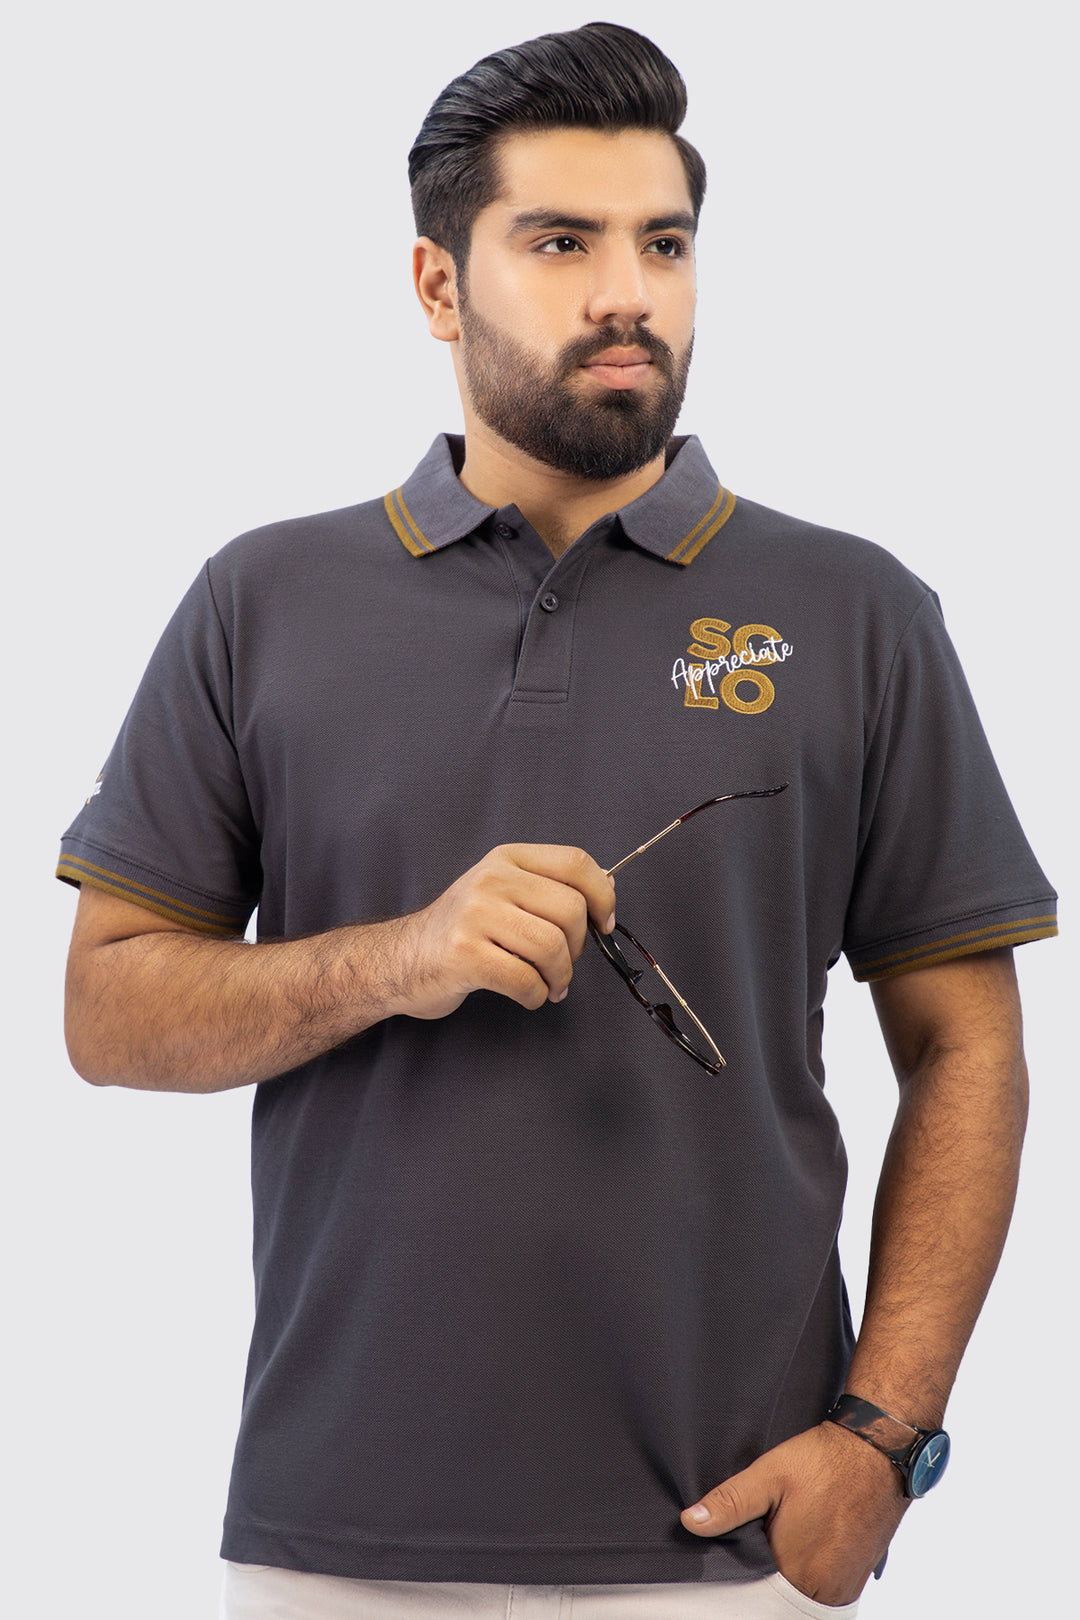 Grey SCLO Embroidered Polo Shirt (Plus Size) - S23 - MP0228P